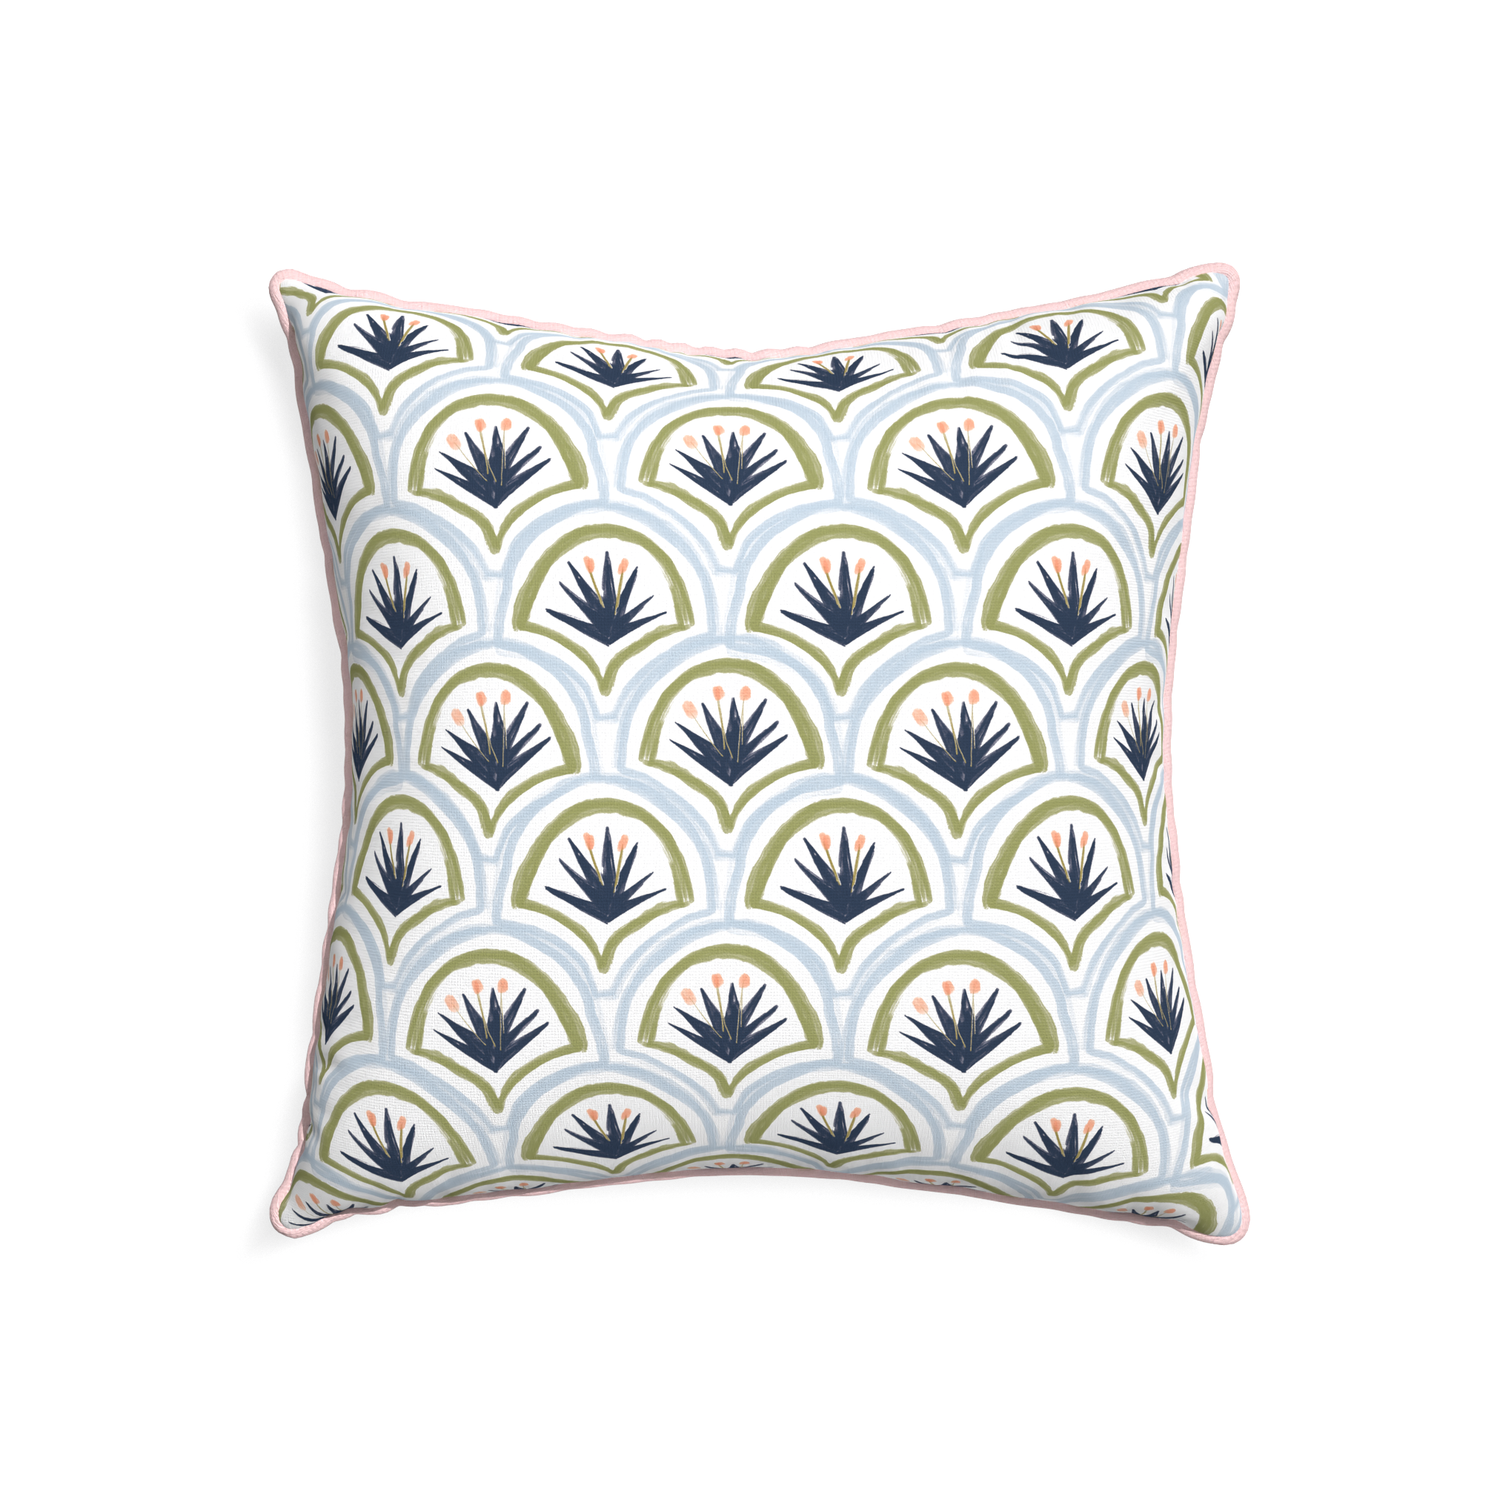 22-square thatcher midnight custom art deco palm patternpillow with petal piping on white background